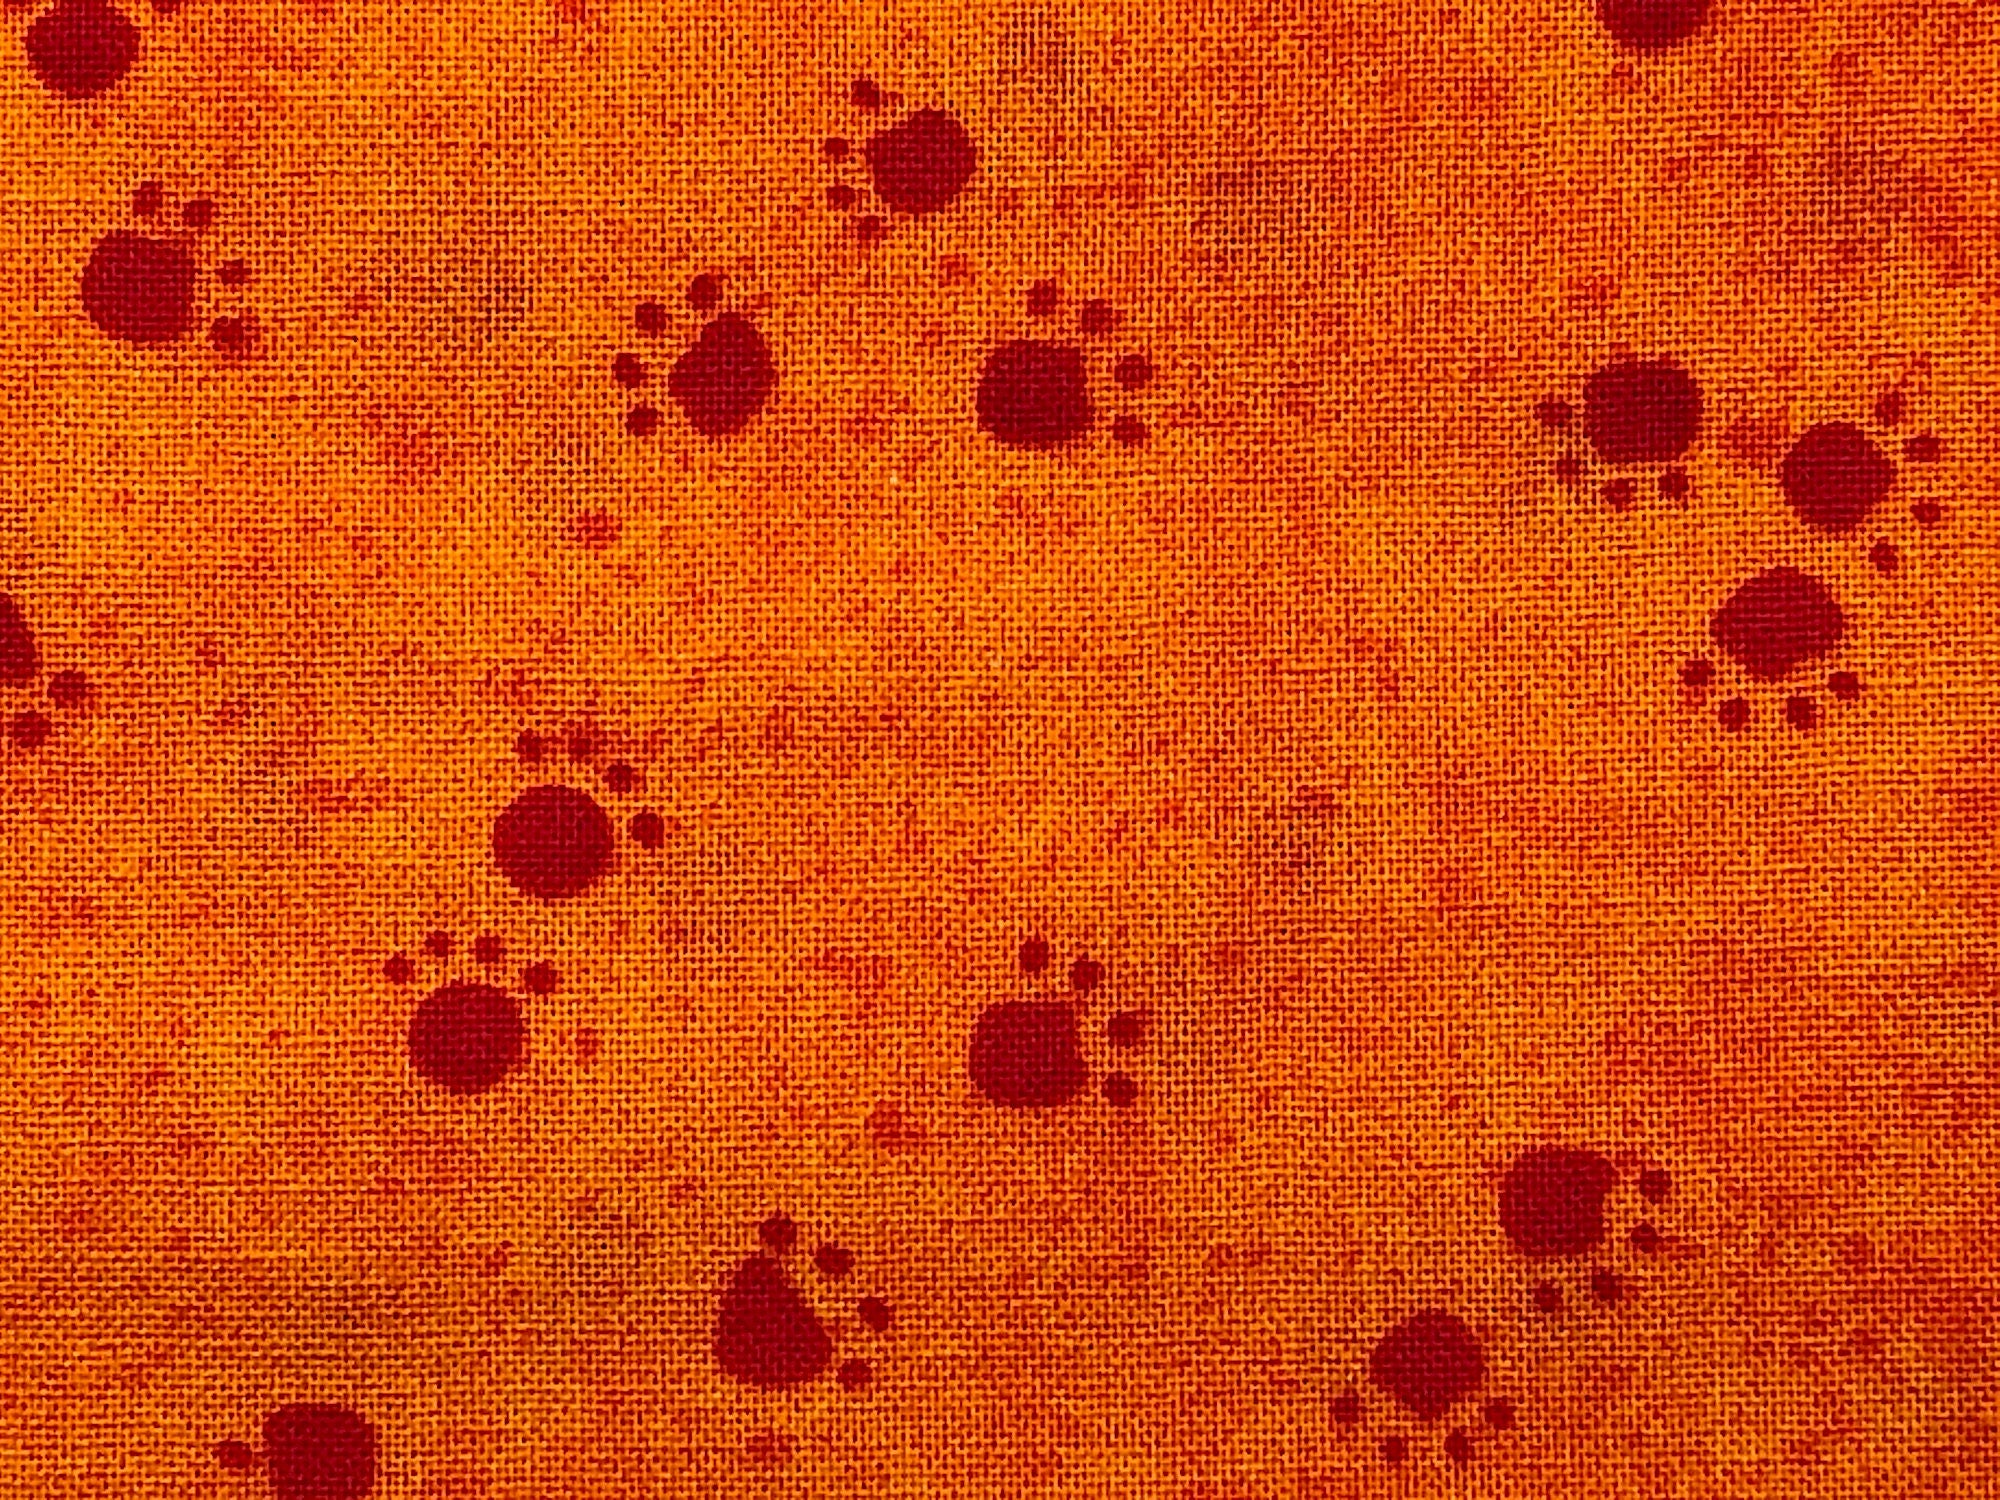 Close up of paw prints.